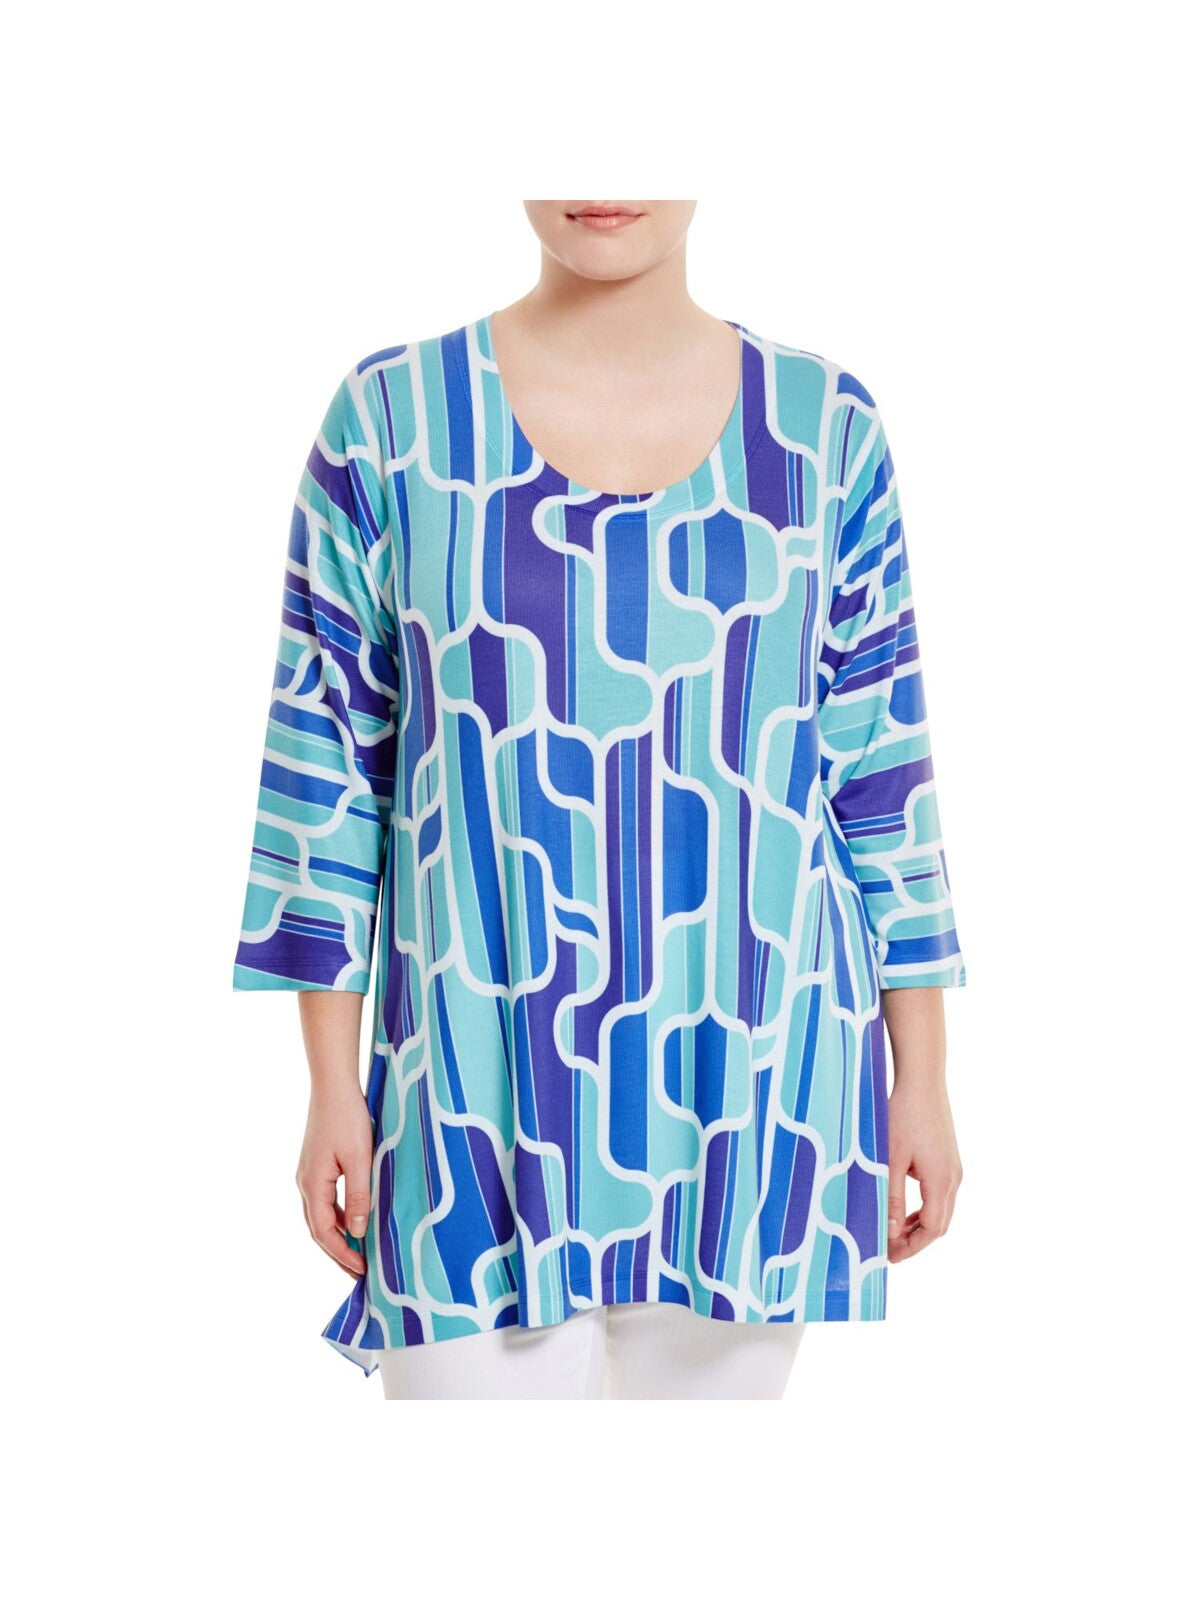 NALLY & MILLIE Womens Blue Stretch Printed 3/4 Sleeve Wear To Work Tunic Top Plus 1X